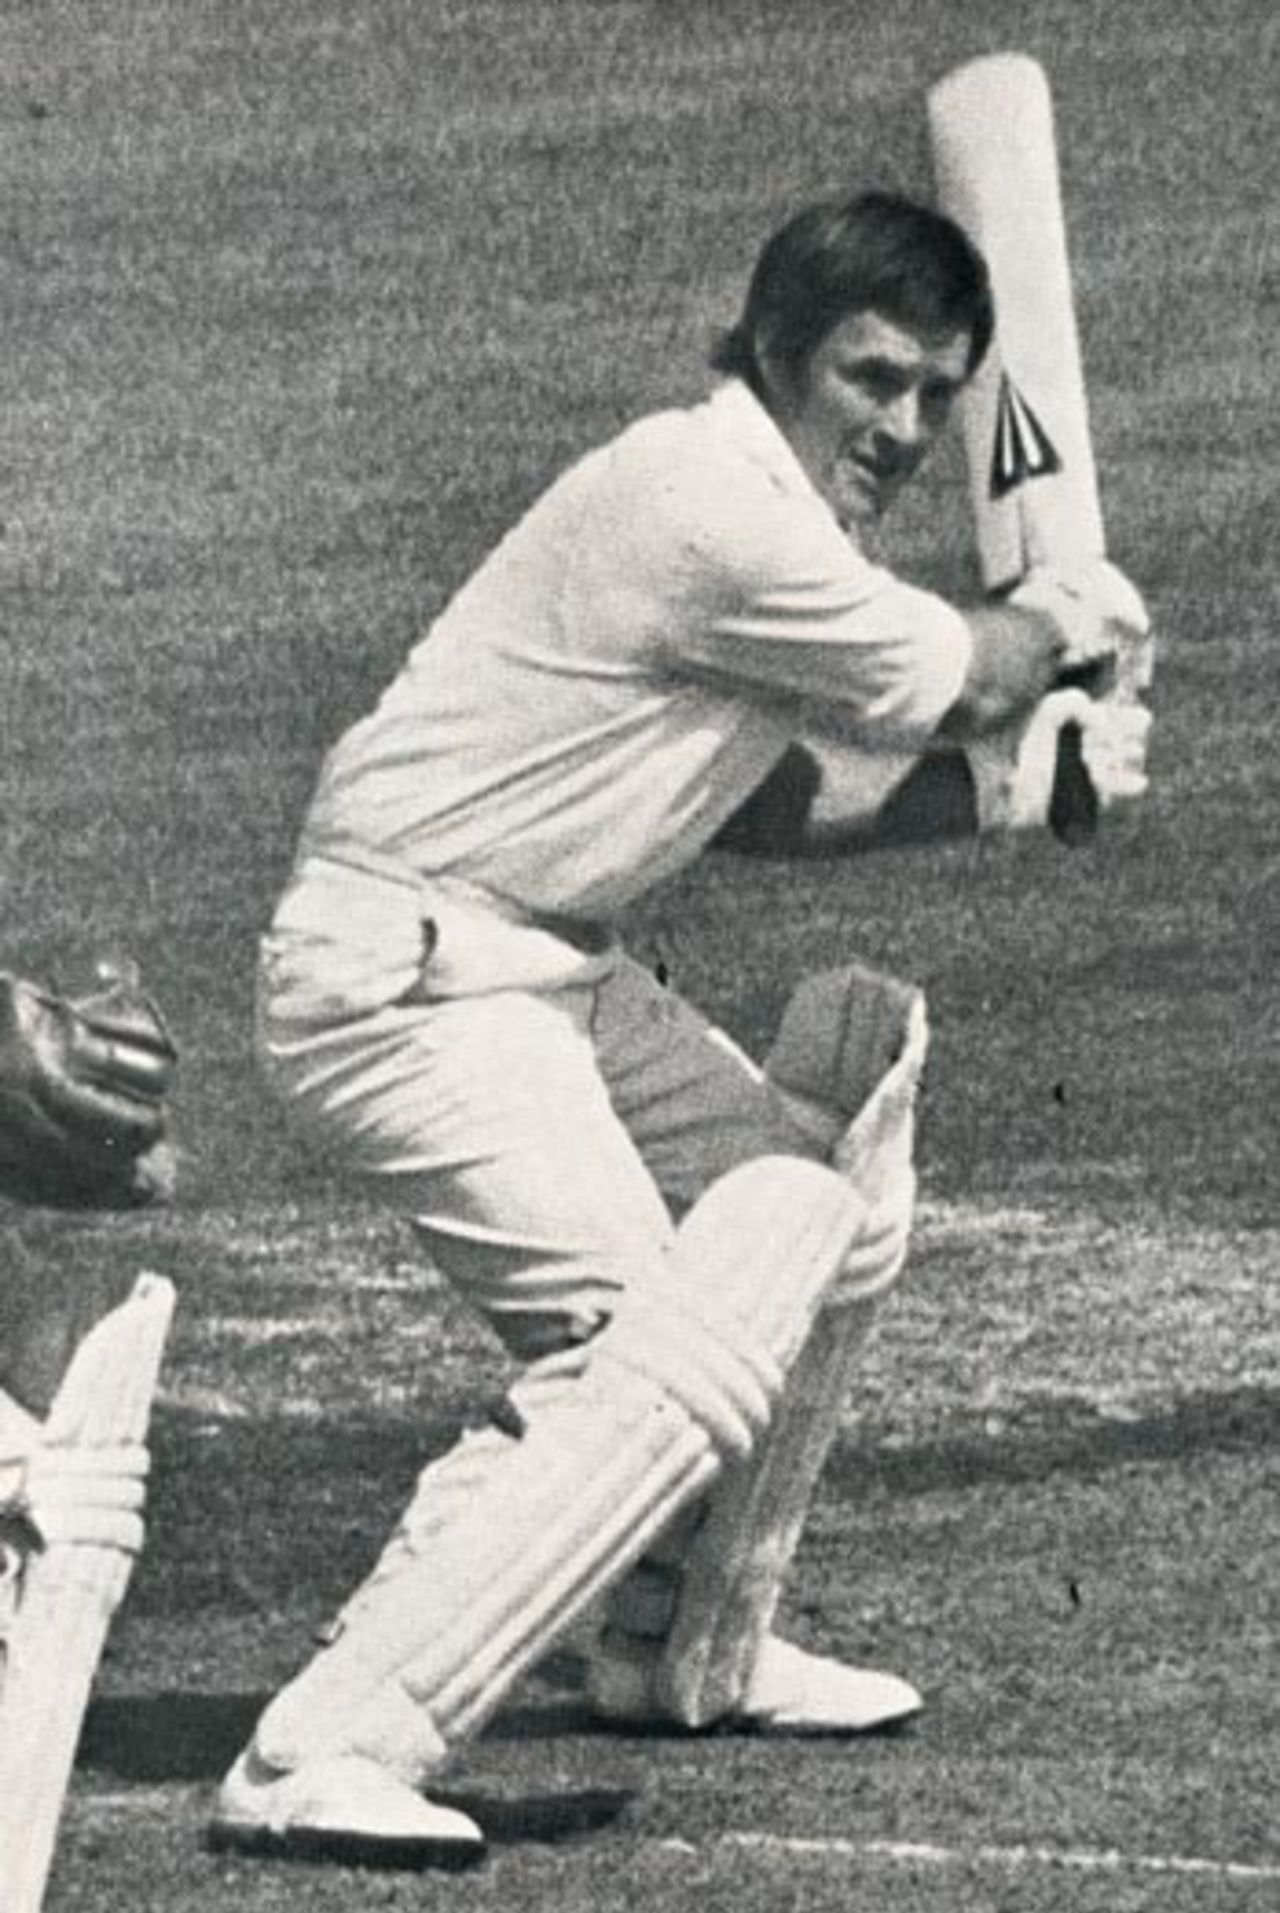 Dennis Amiss batting at Lord's in 1972